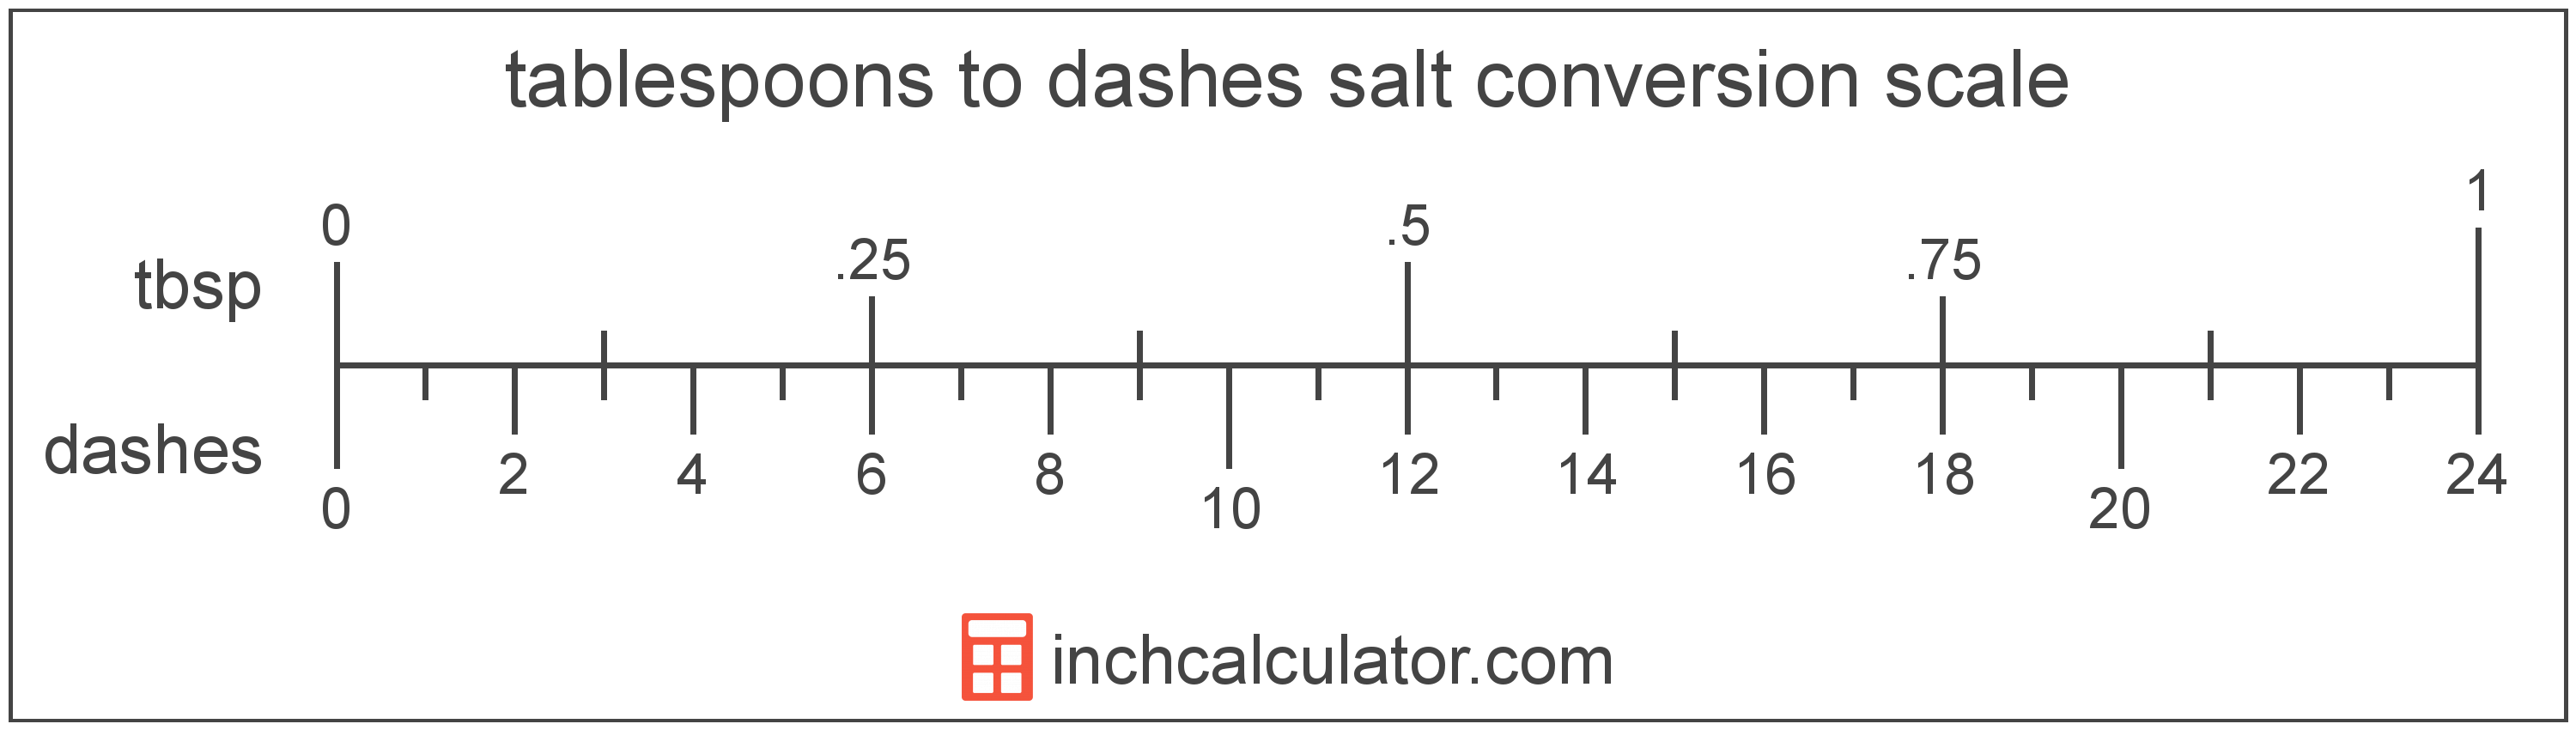 conversion scale showing dashes and equivalent tablespoons salt volume values